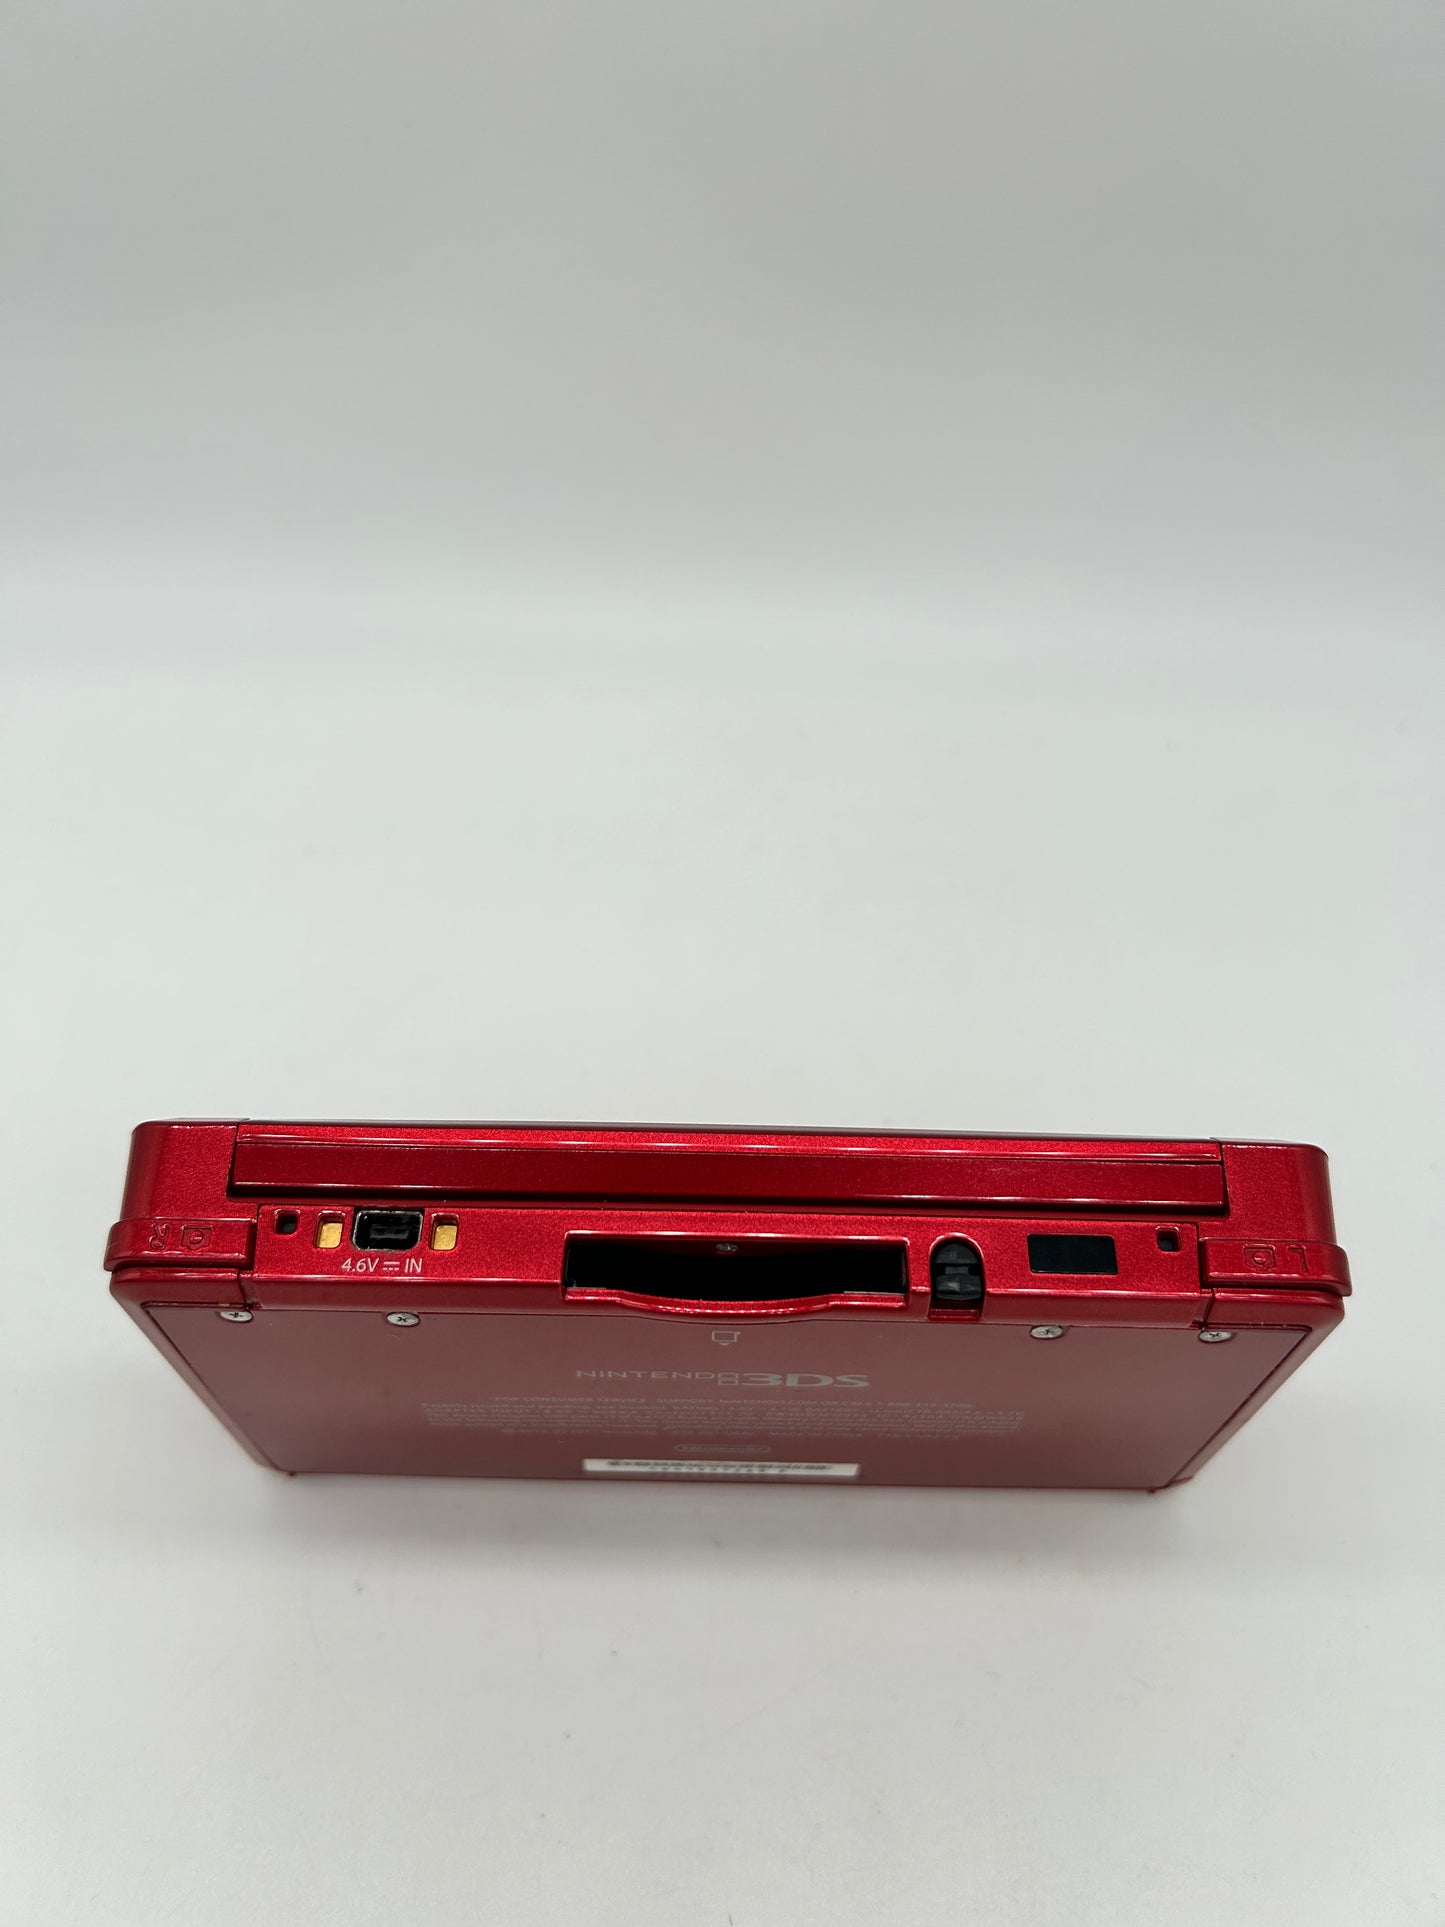 NiNTENDO 3DS CONSOLE | MODEL RED FLAME RED CTR-001(USA)